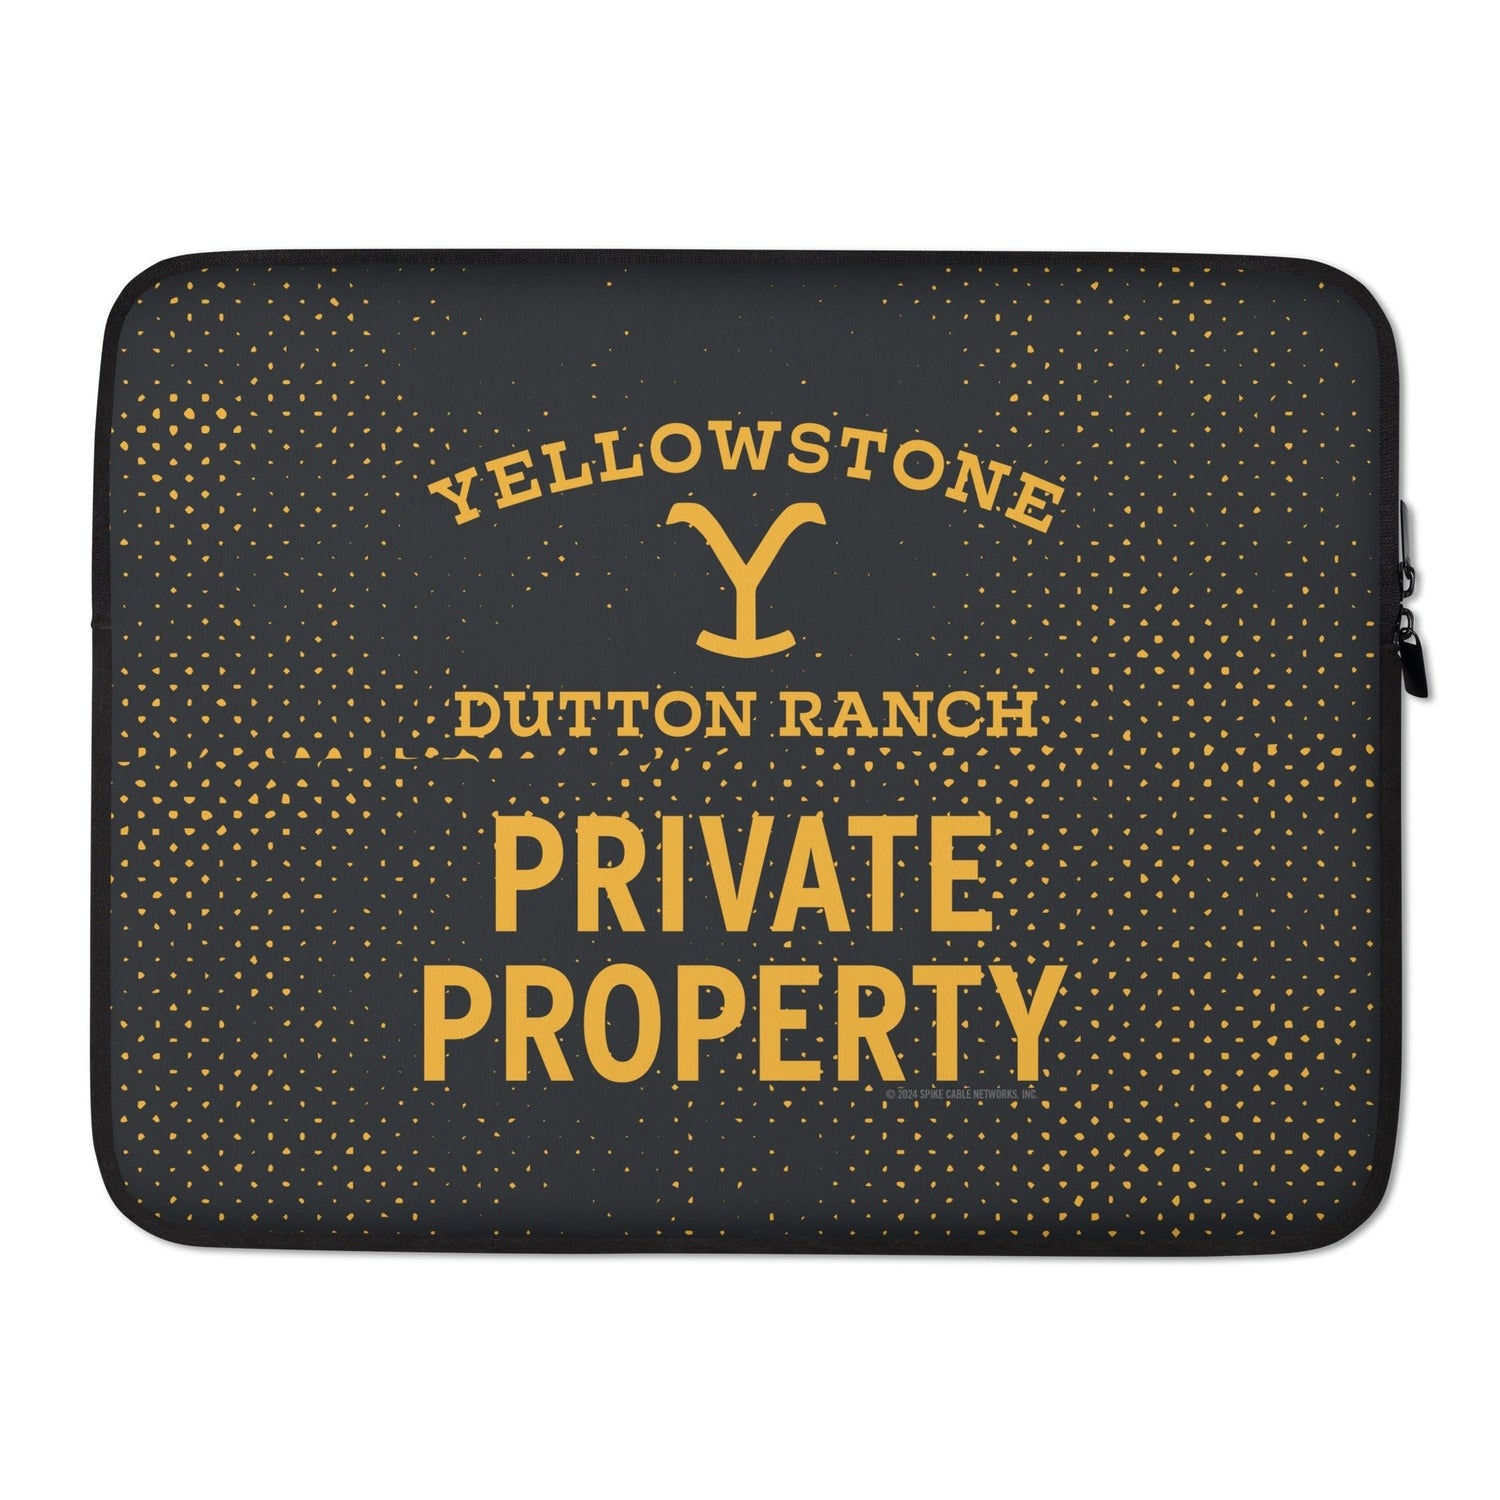 Yellowstone Dutton Ranch Private Property Laptop Sleeve - Paramount Shop